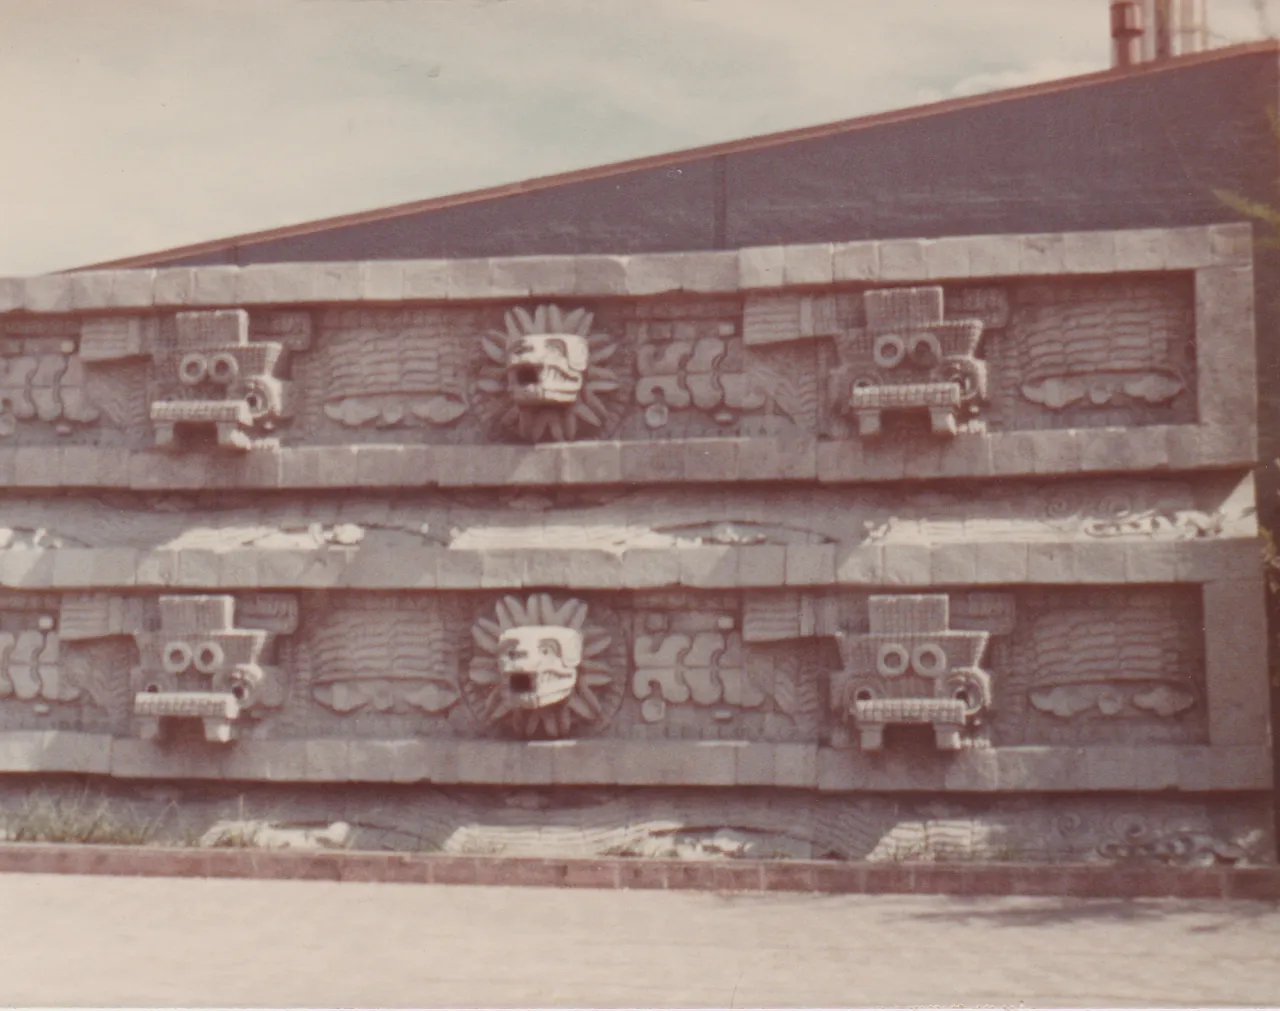 1975-03-26 - Wednesday - San Antonio, no dates on these pic-08 - Wall art, animal sculpture, 11pics.png